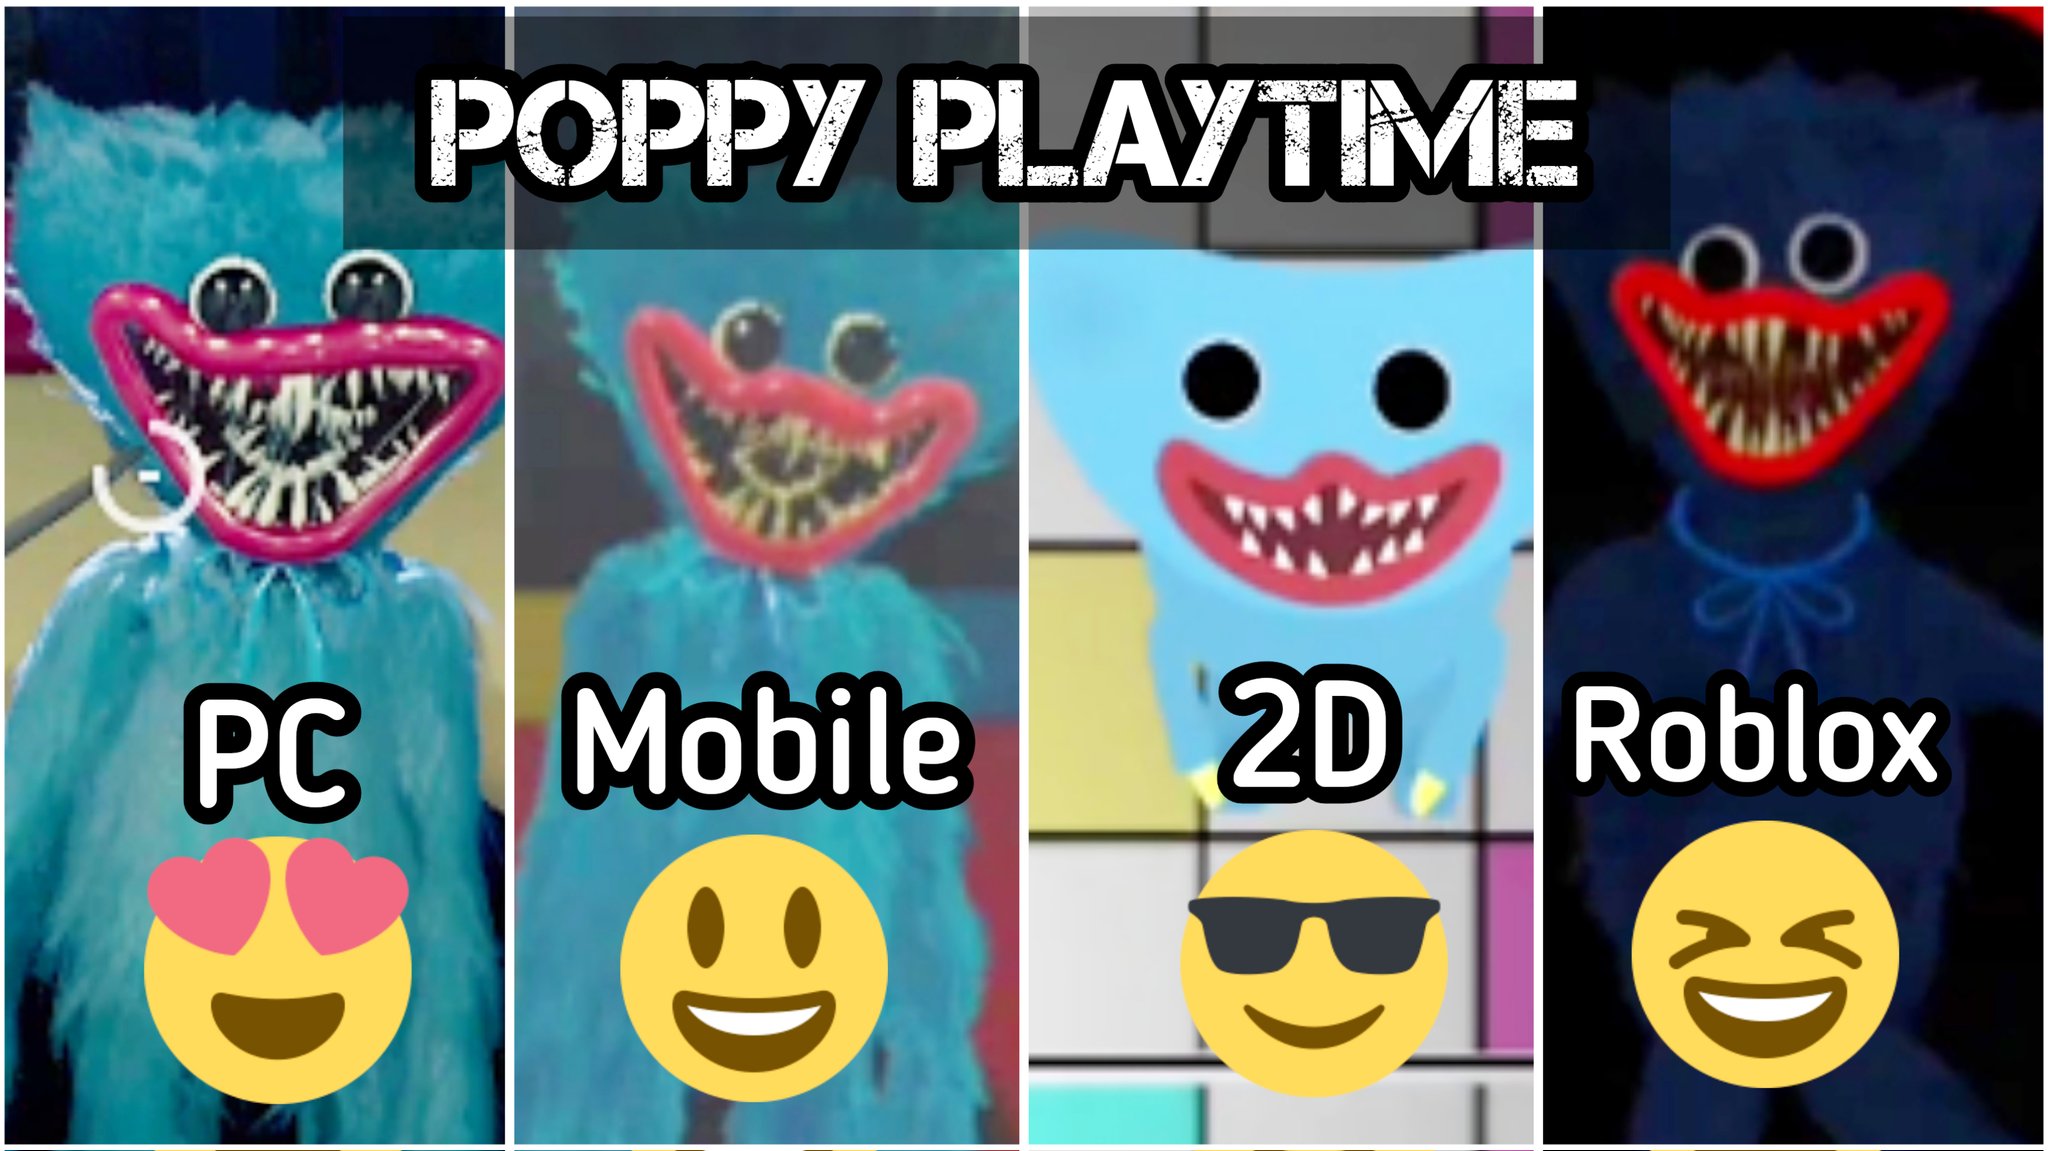 Poppy Playtime Ch. 2 On Mobile Vs PC: Which Is Better